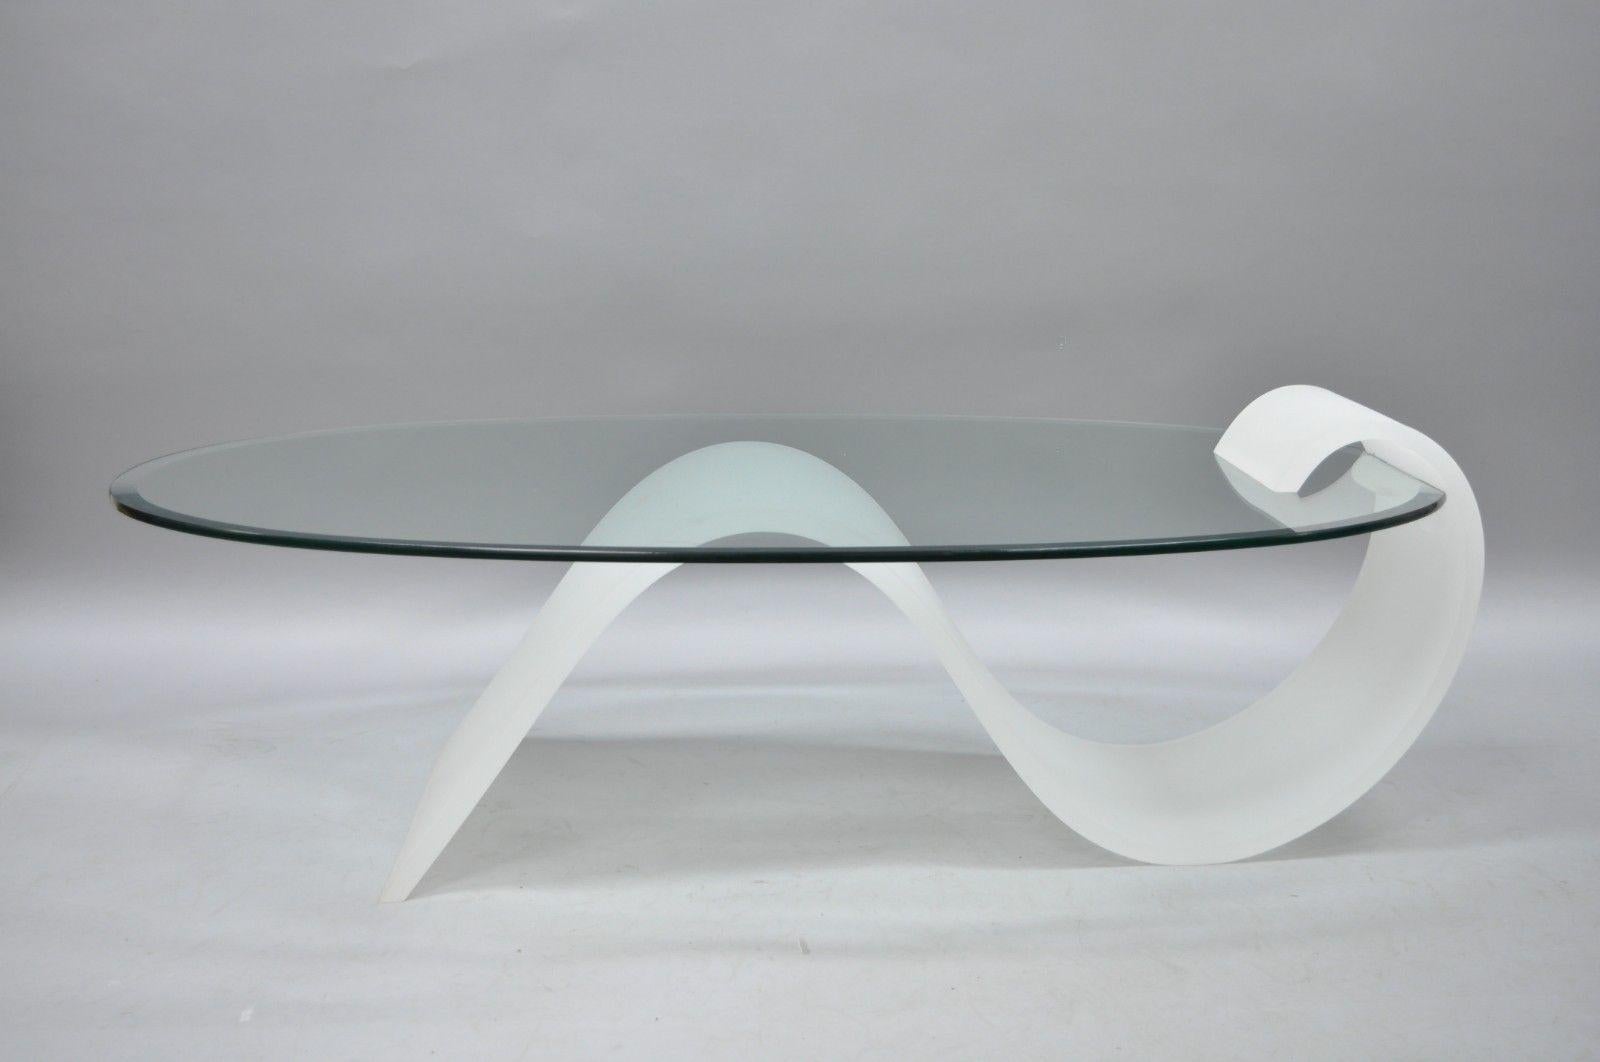 Vintage sculptural Lucite and oval glass Mid-Century Modern s-shaped cantilever coffee table. Item features shapely frosted Lucite base, thick bevelled edge oval glass top, unique cantilever style construction, and sleek sculptural form, circa 1970.